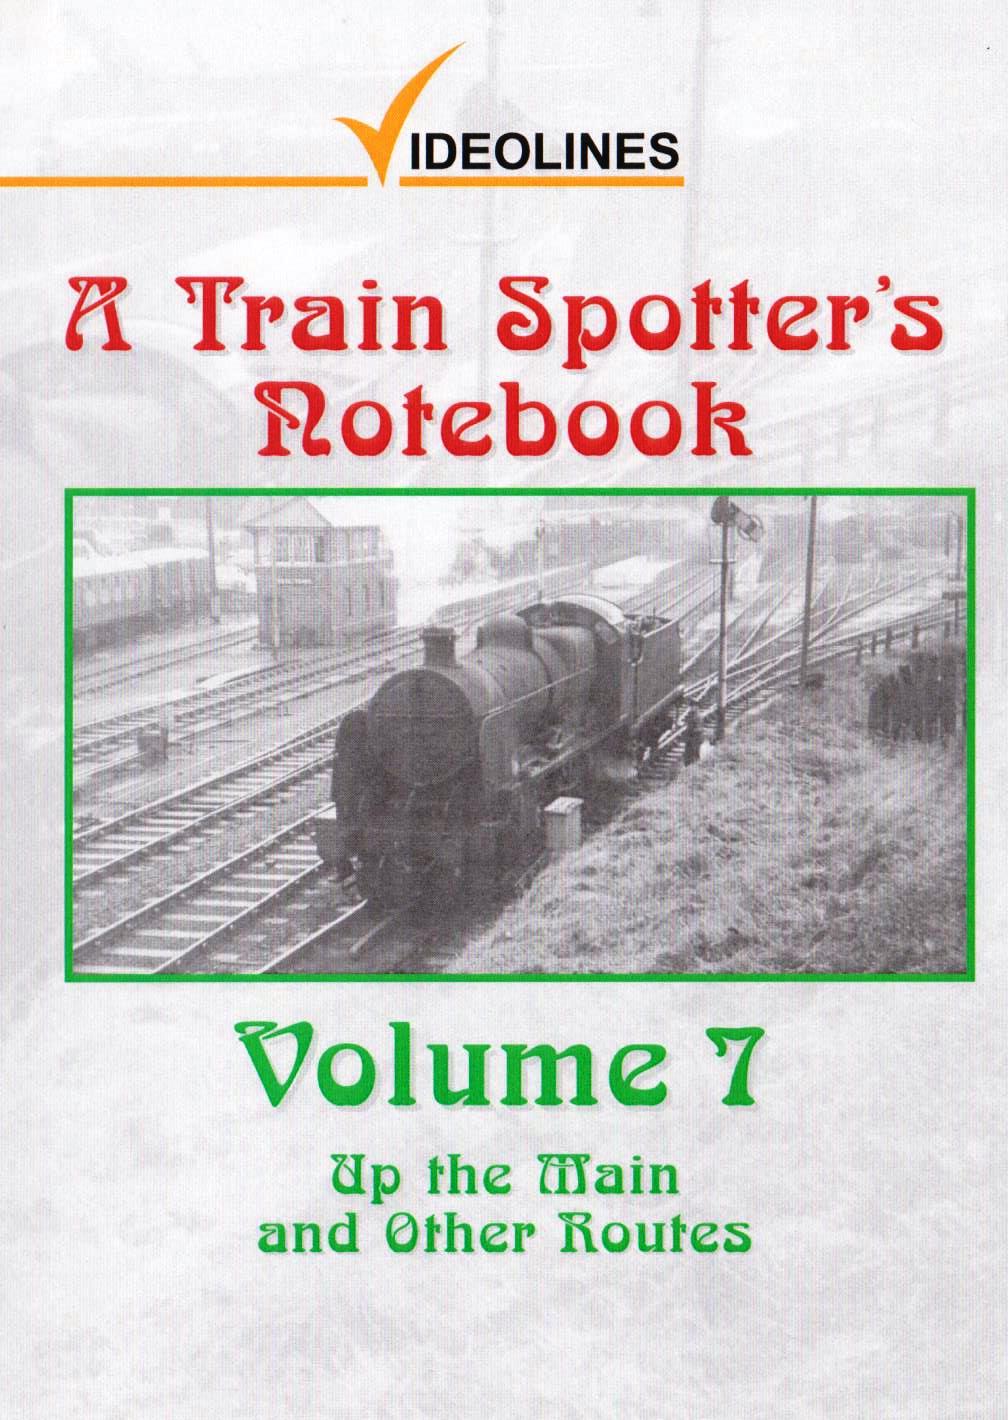 A Train Spotters Notebook Vol. 7: Up the Main and Other Routes